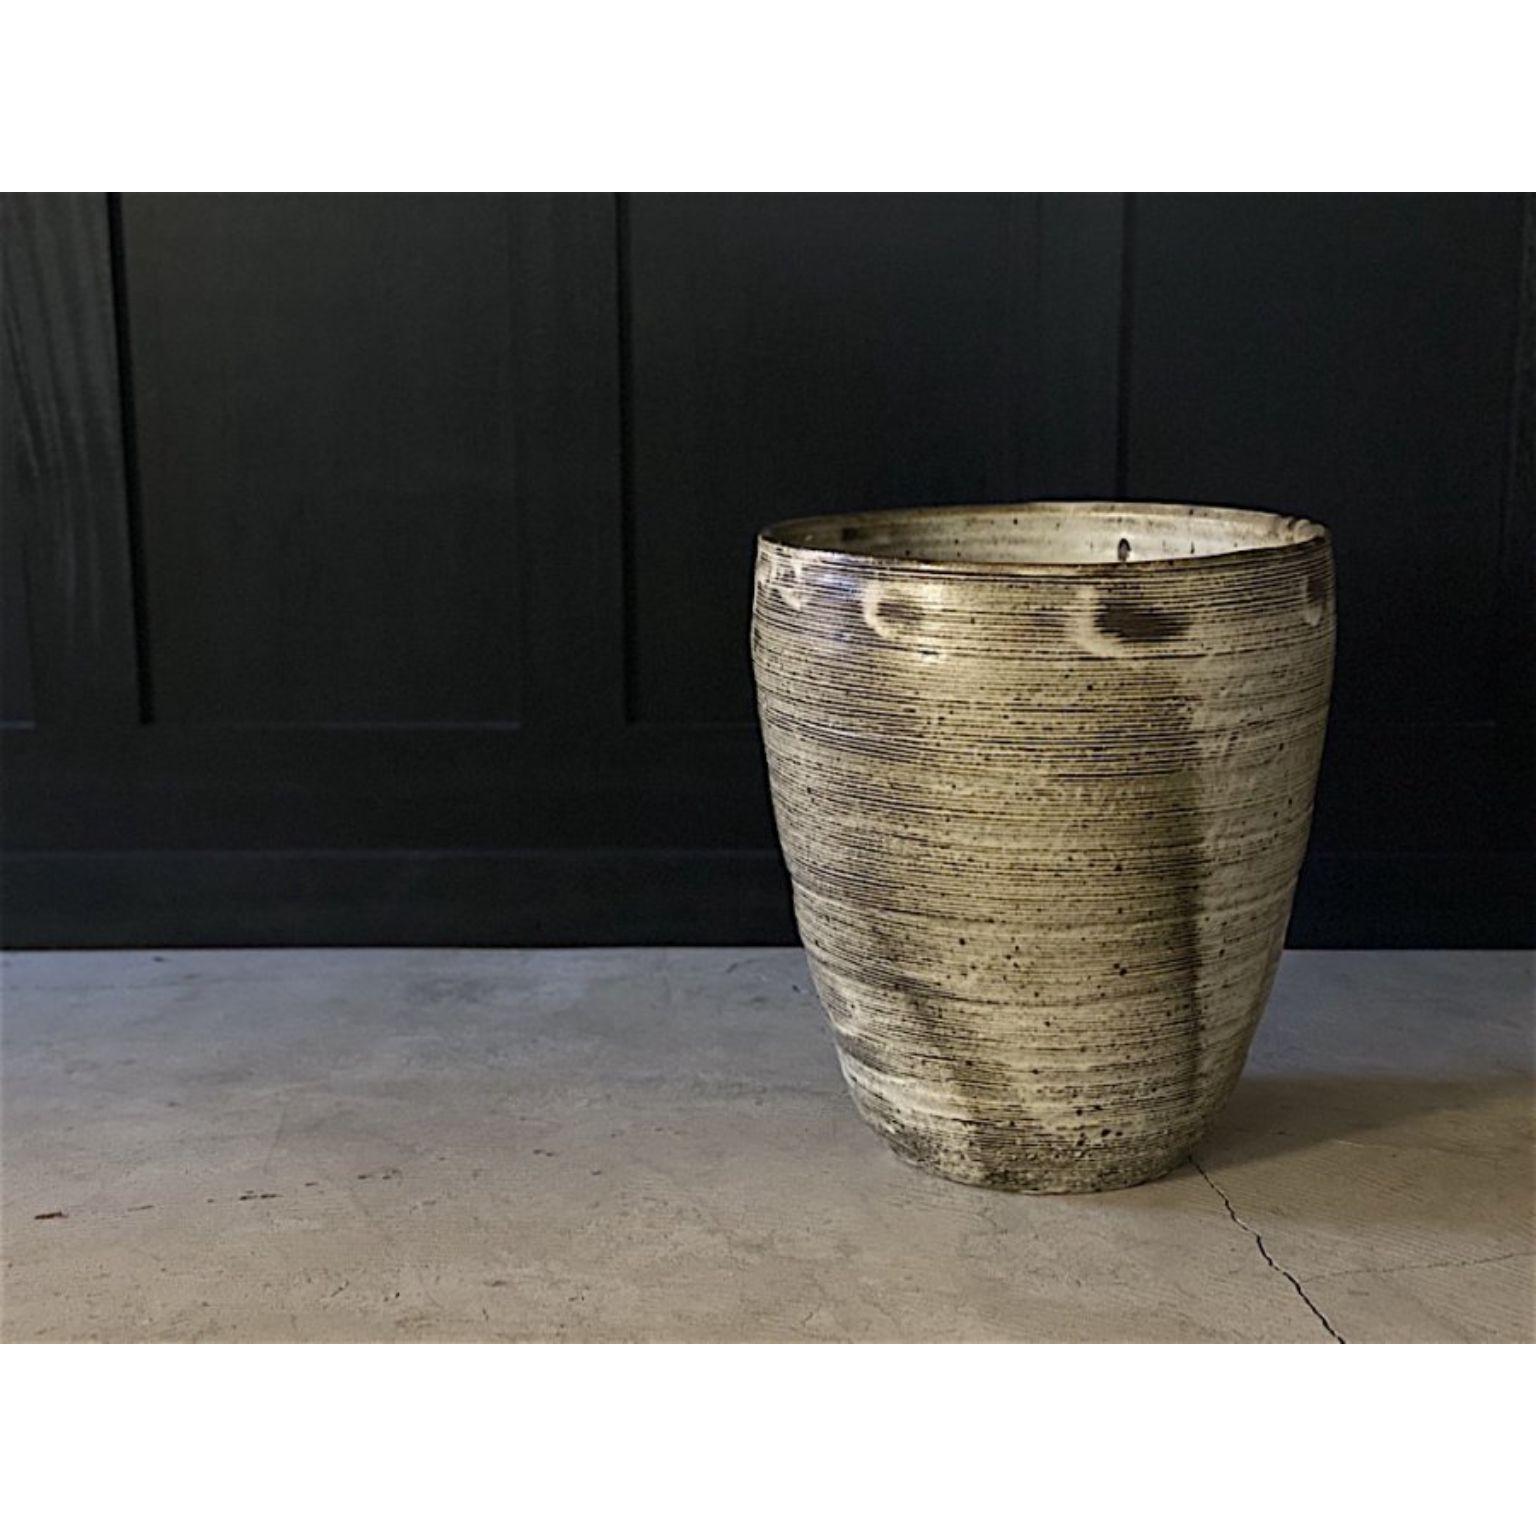 Japanese Handcrafted Vase #2 by Teppei Ono For Sale